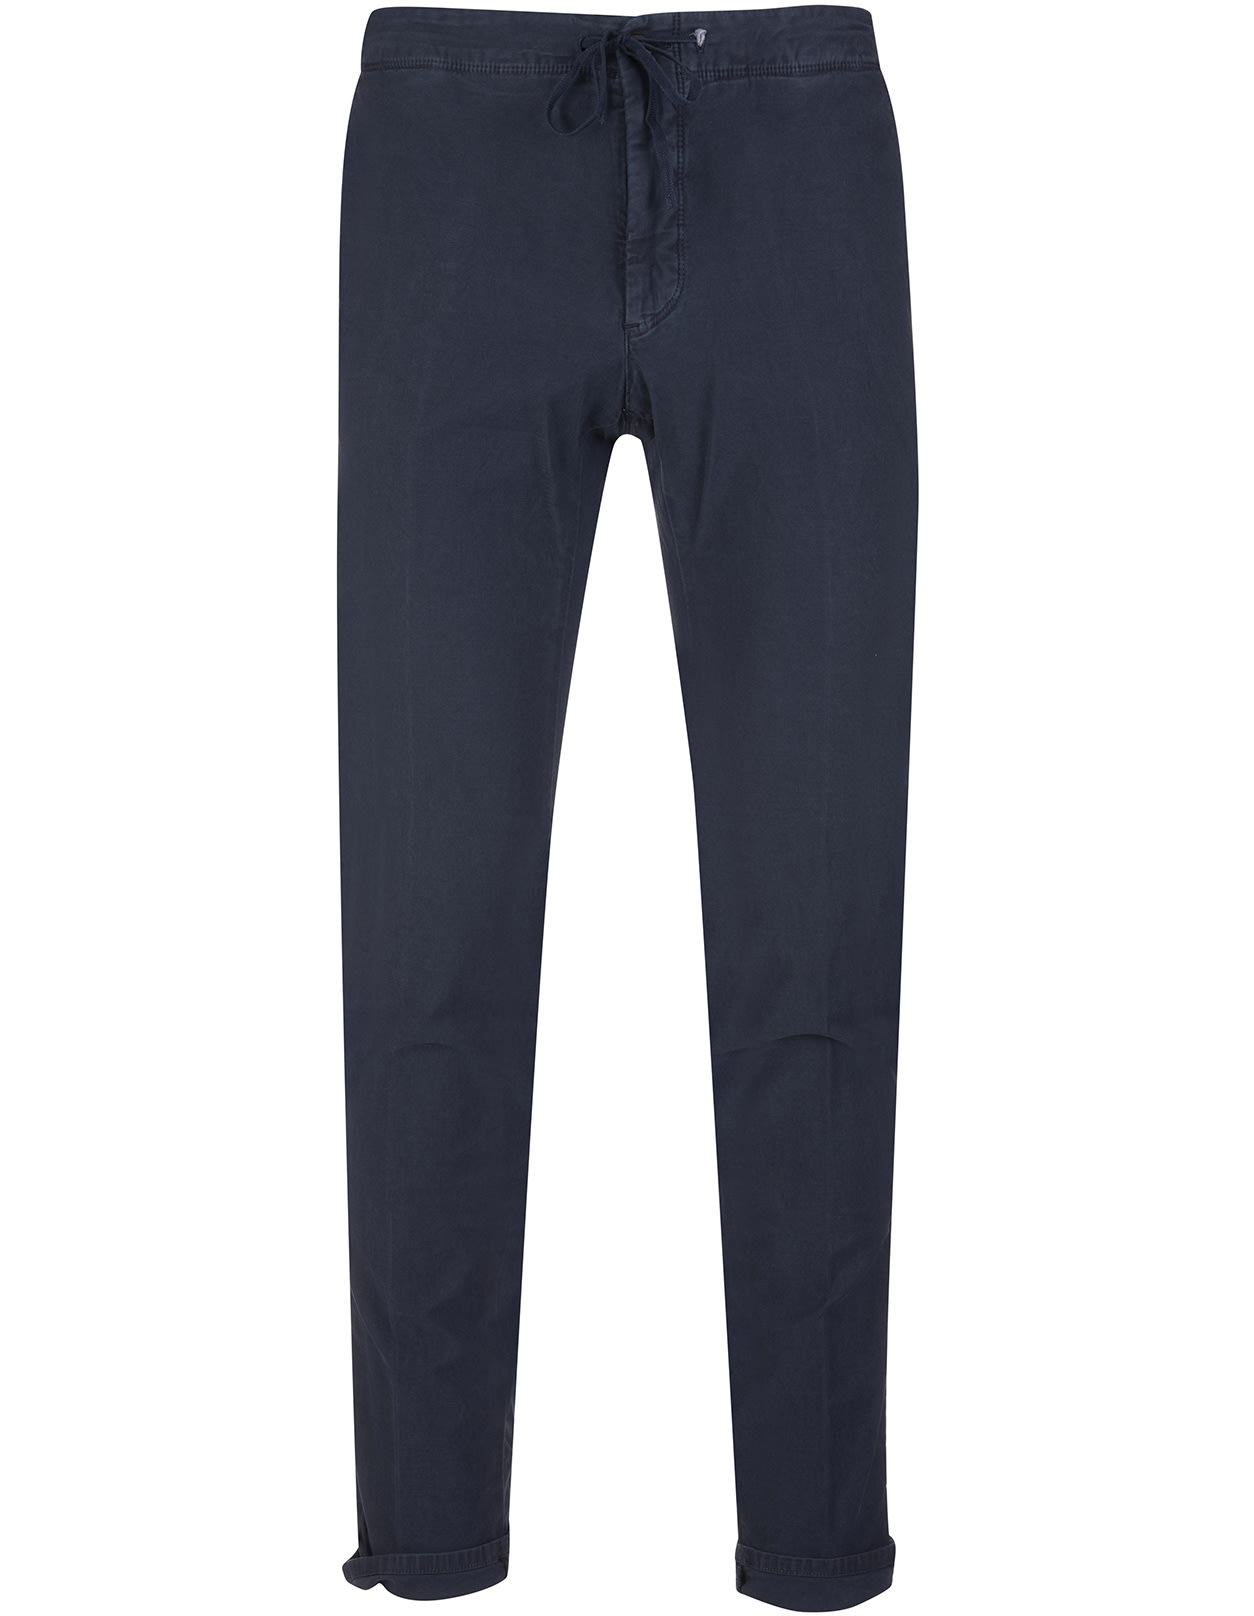 Incotex Man Slim Fit Trousers In Navy Blue Stretch Cotton With Drawstring